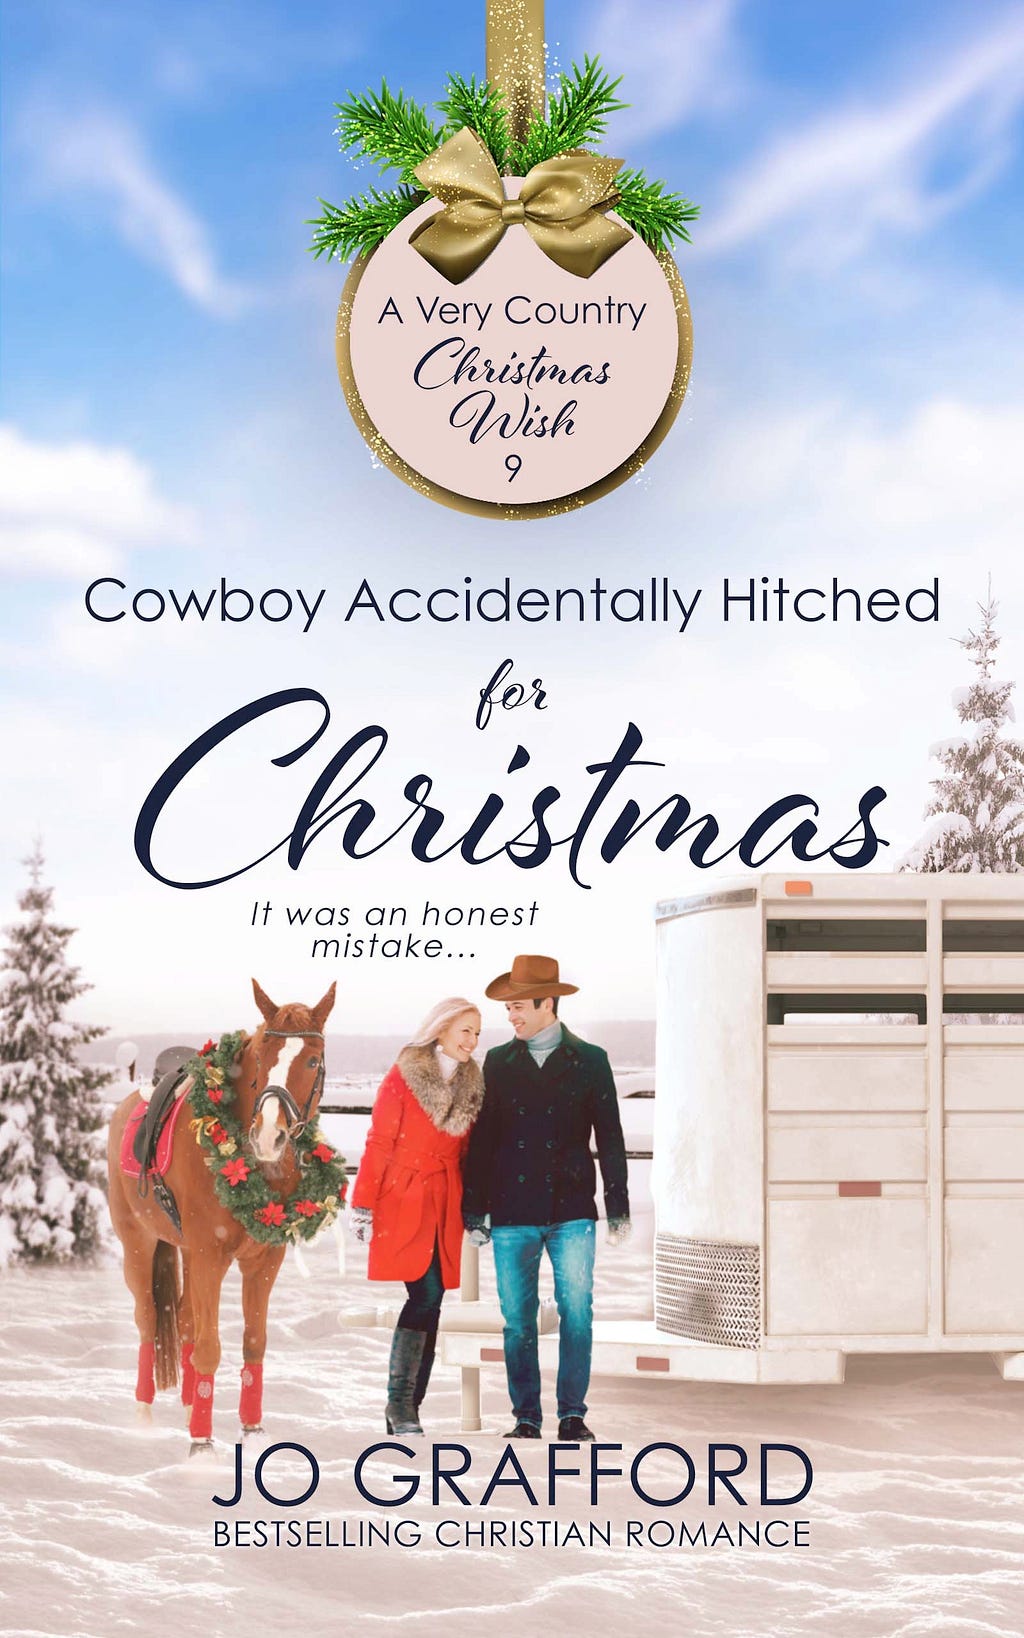 Cowboy Accidentally Hitched for Christmas (A Very Country Christmas Wish #9) PDF